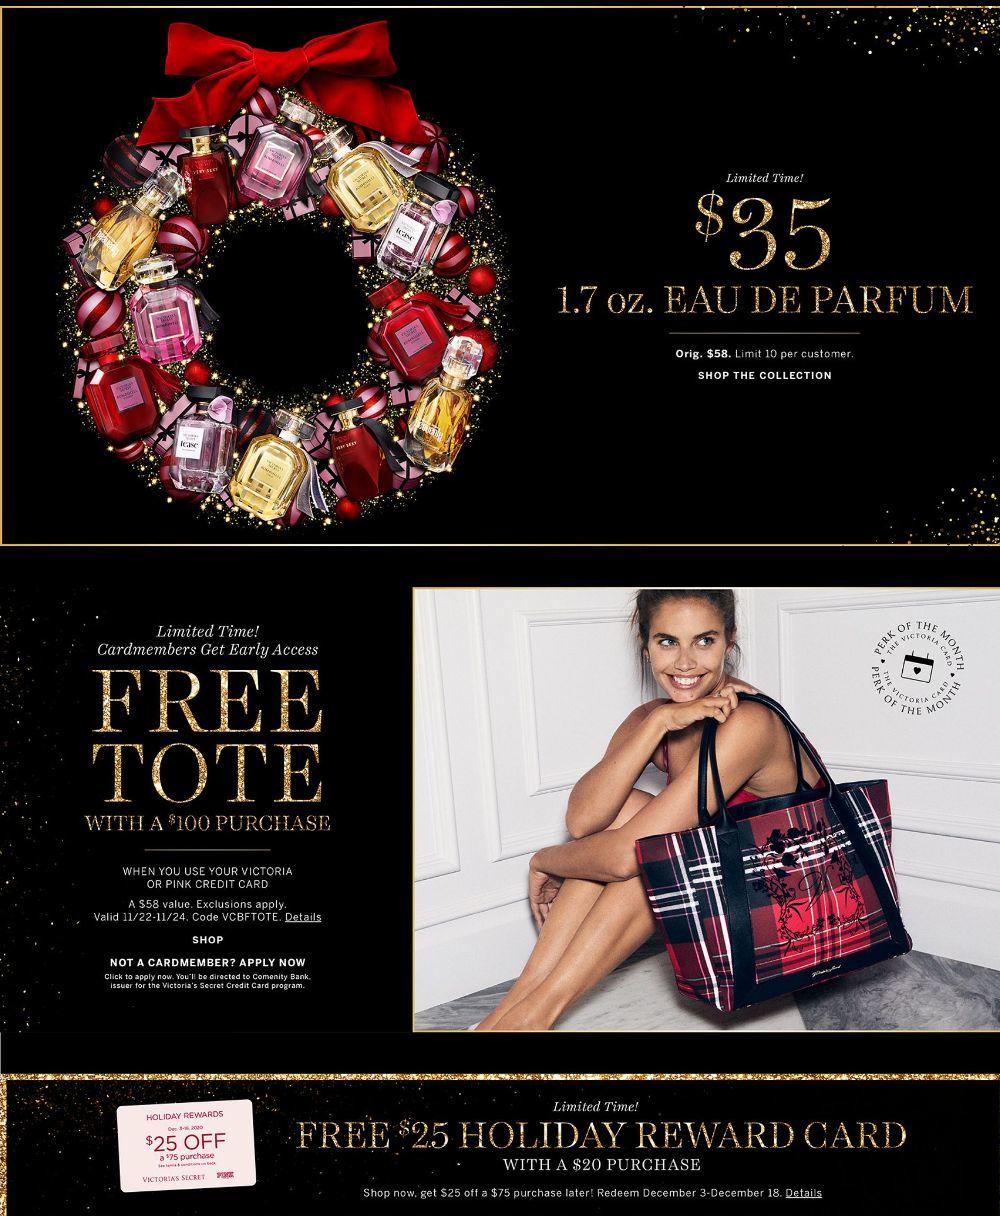 Victoria's Secret Black Friday Ad 2020 - What Is The Victoria Secret Black Friday Sale